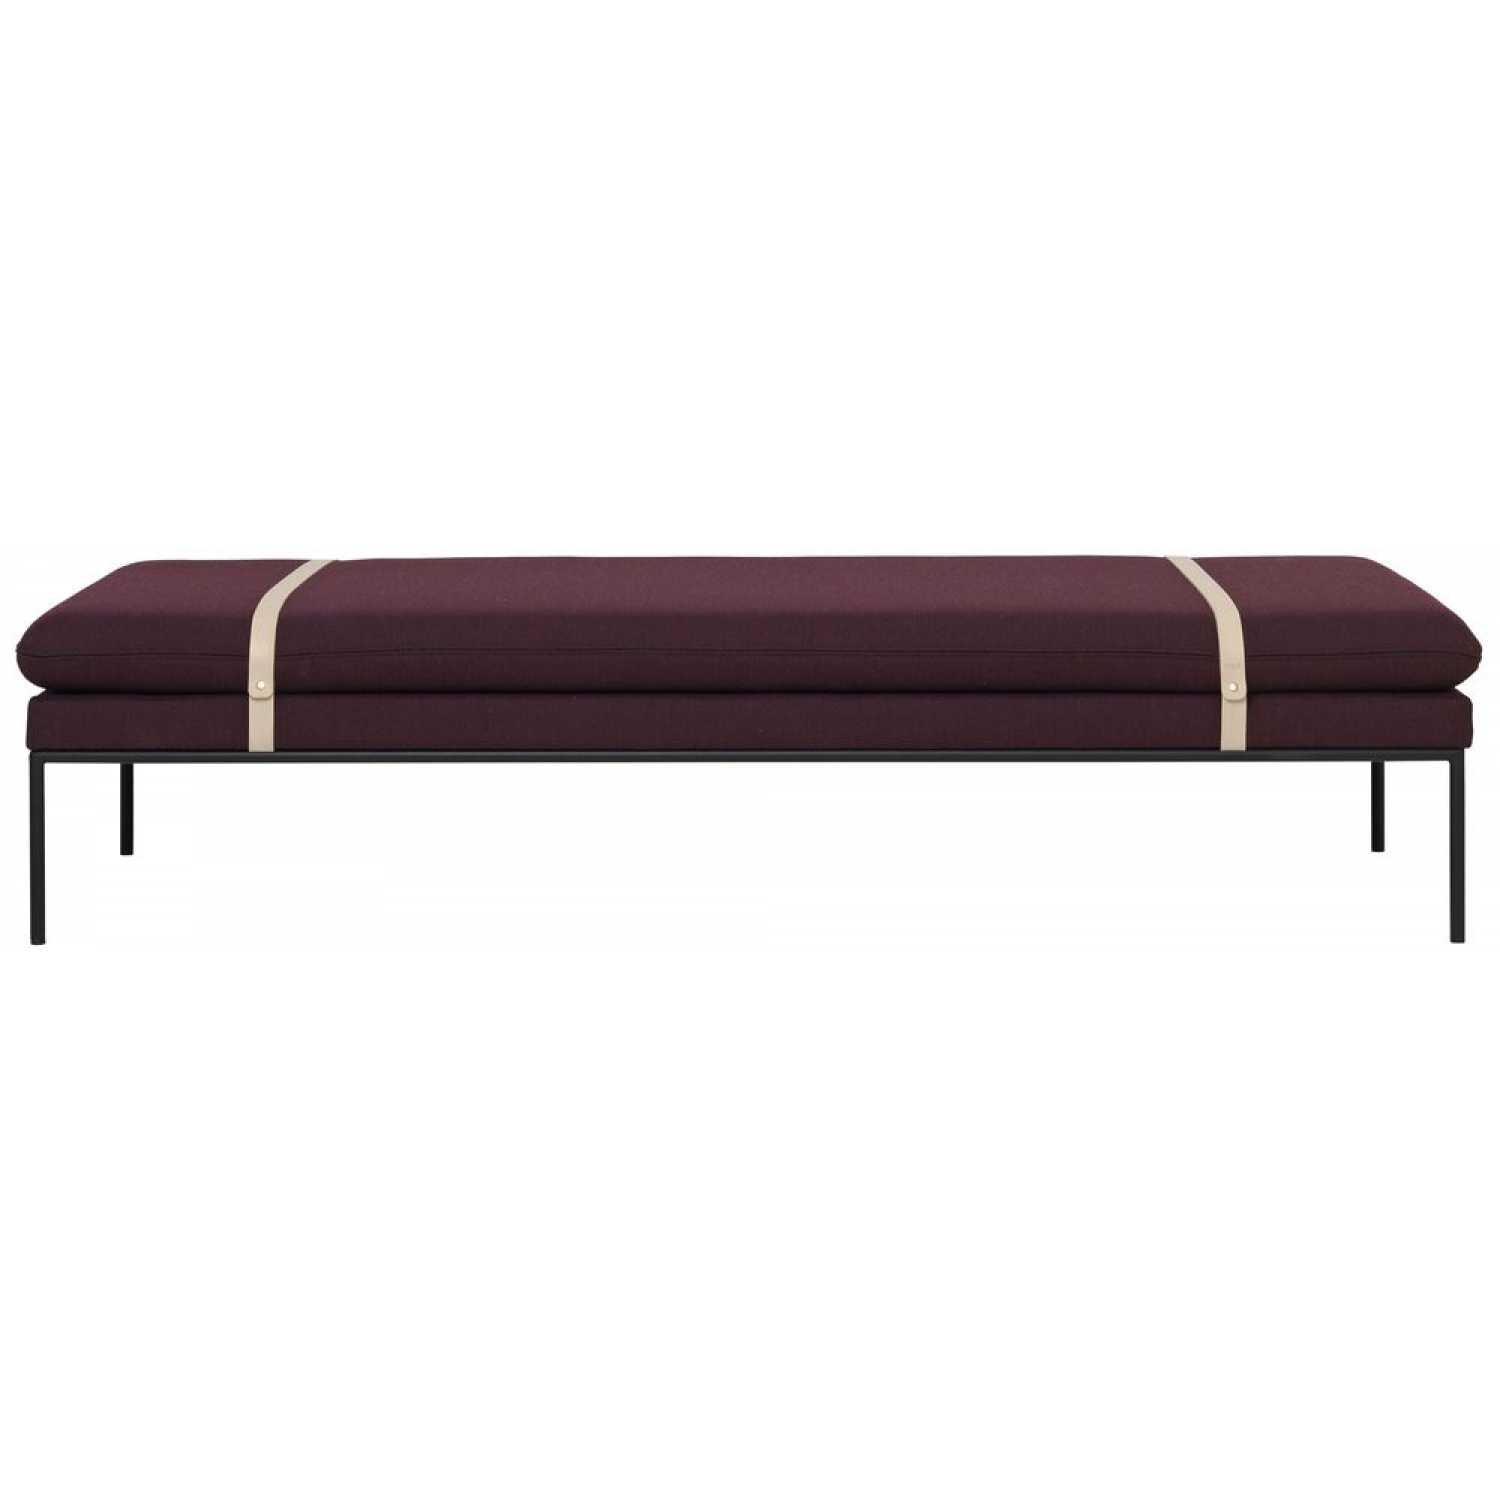 Ferm Living Turn Fiord Daybed - Bordeaux - Natural Strap